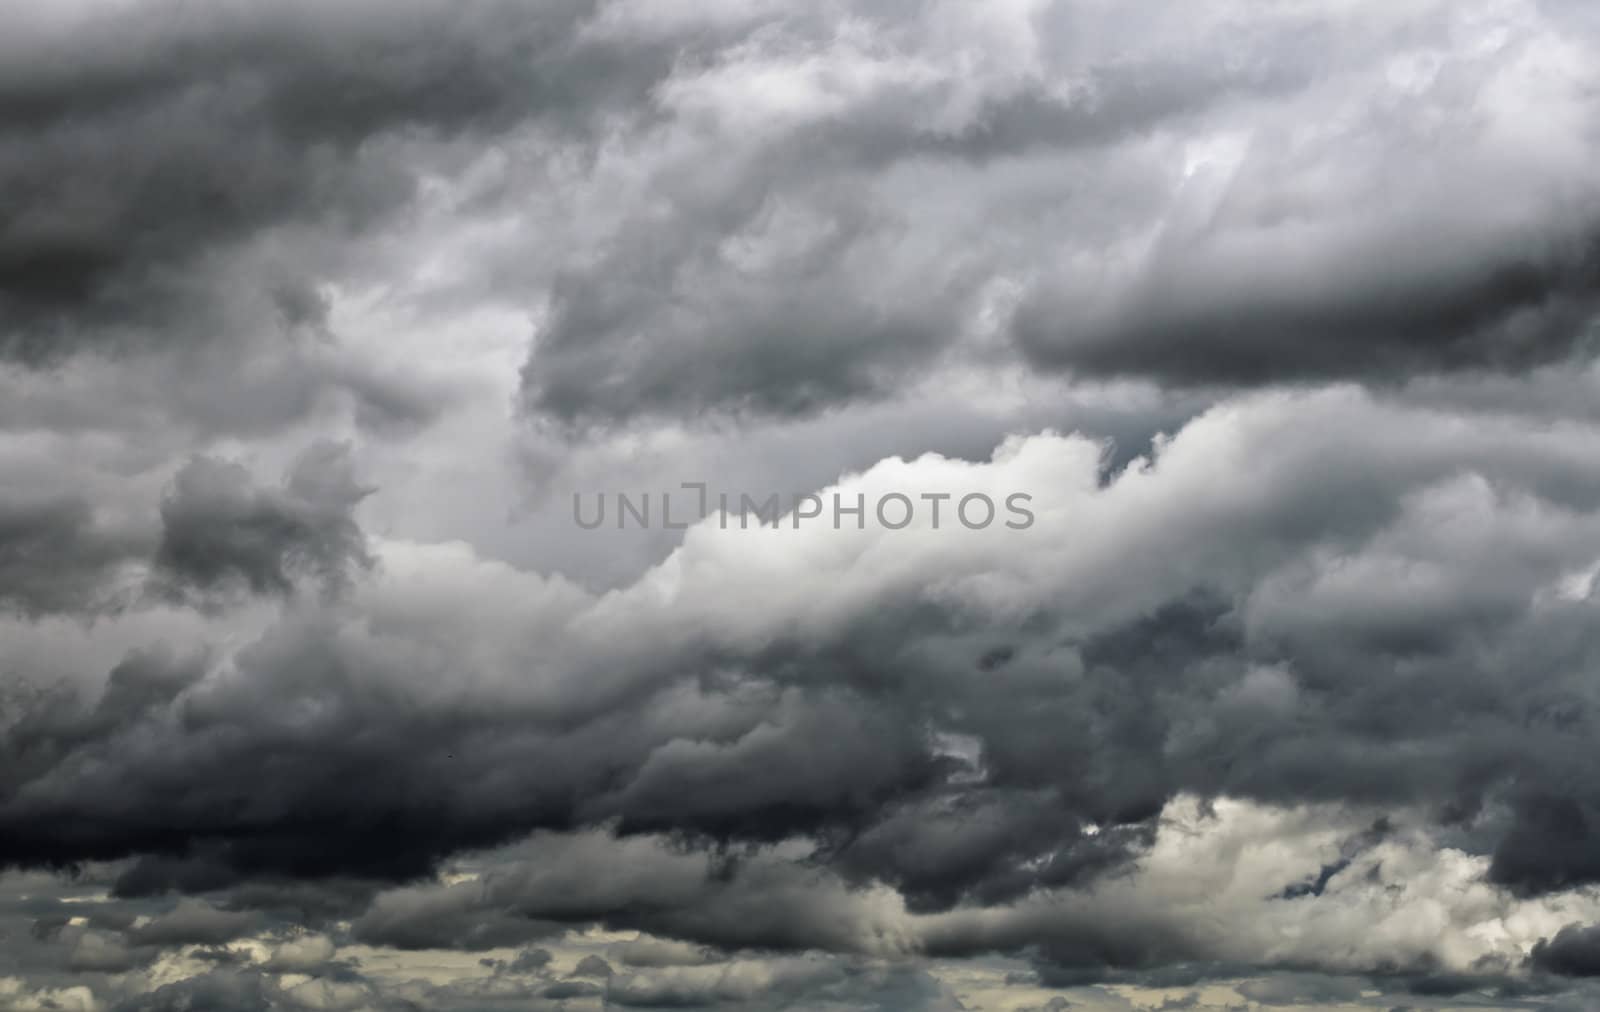 Sky with violent and dramatic clouds